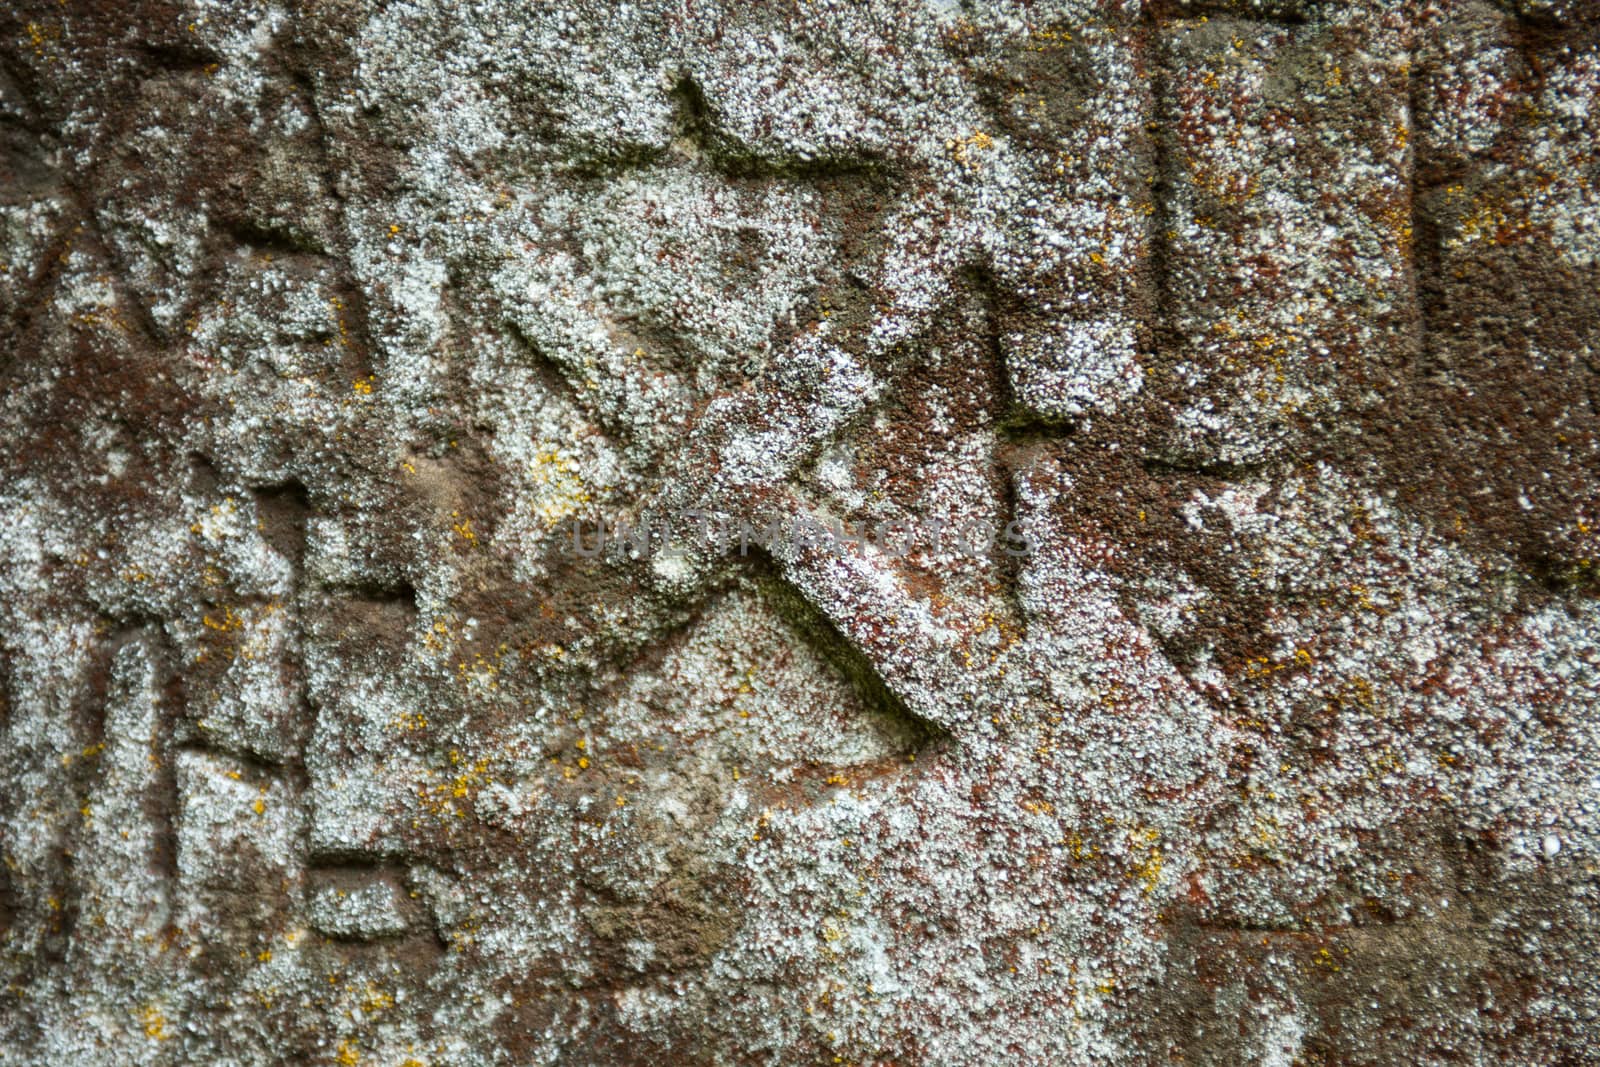 Moss-grown surface of the old stone cross by rootstocks